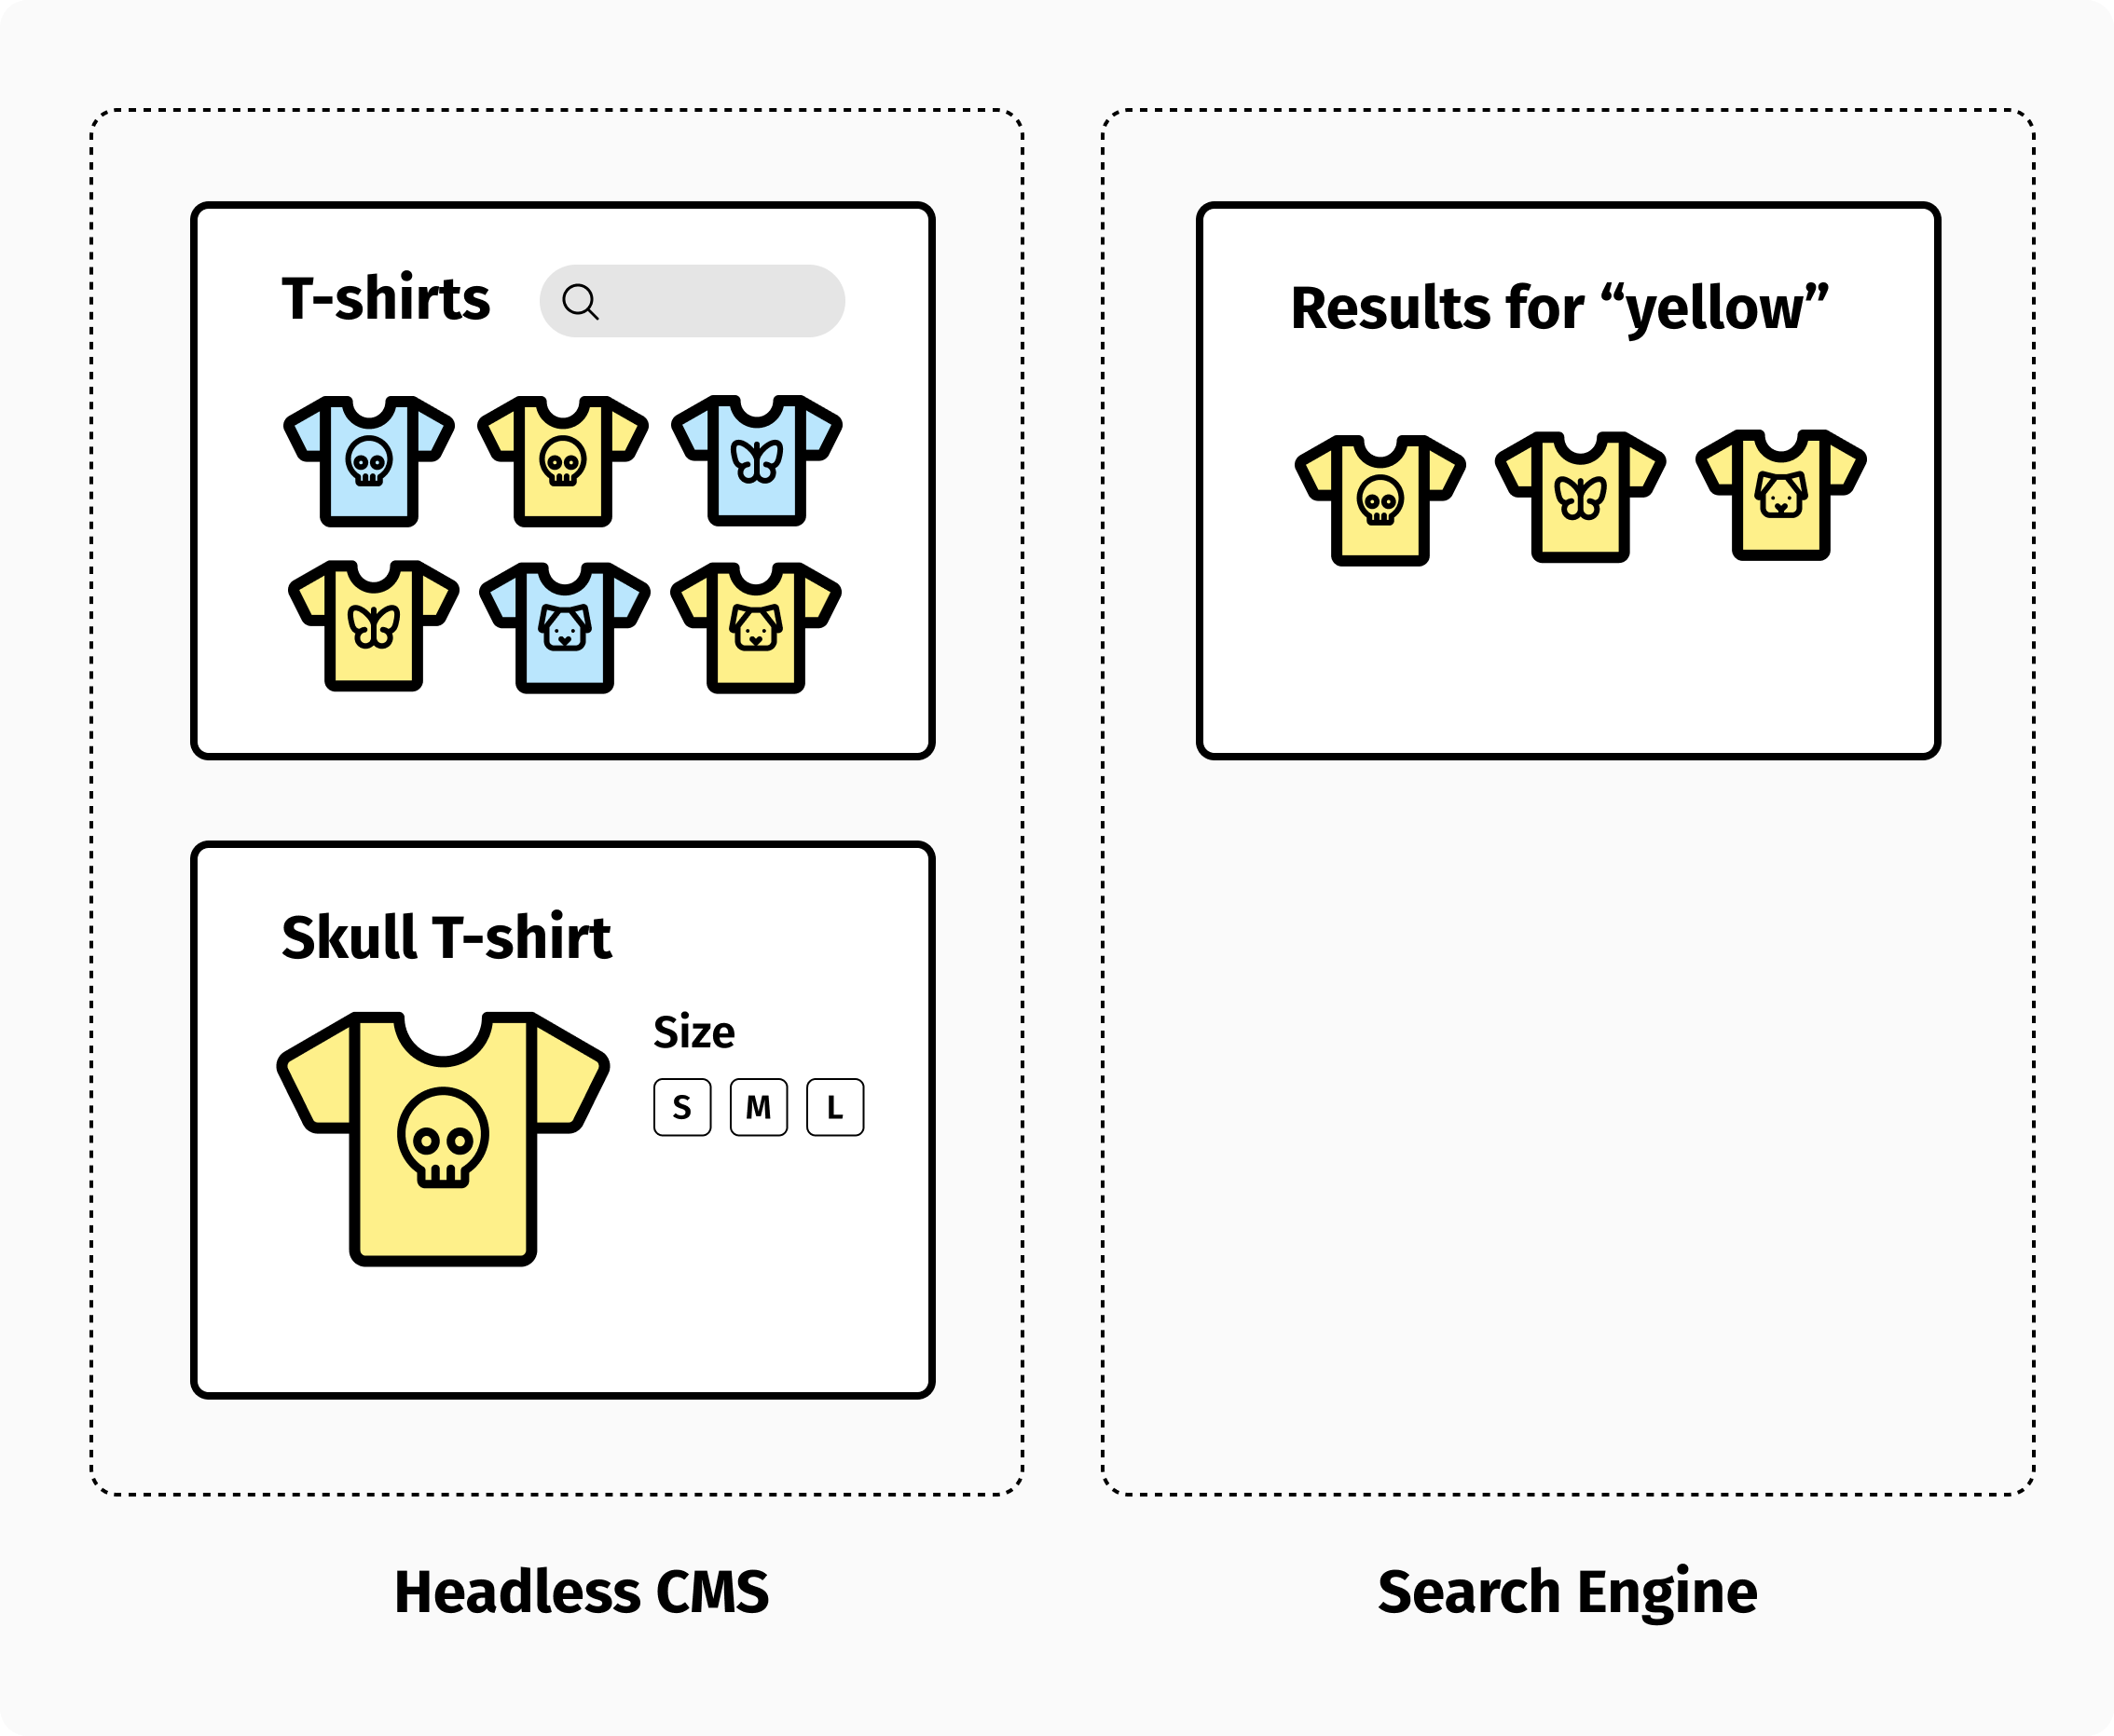 Product listing pages and product pages are generated by the headless CMS, and dynamic search results are provided by the search engine.